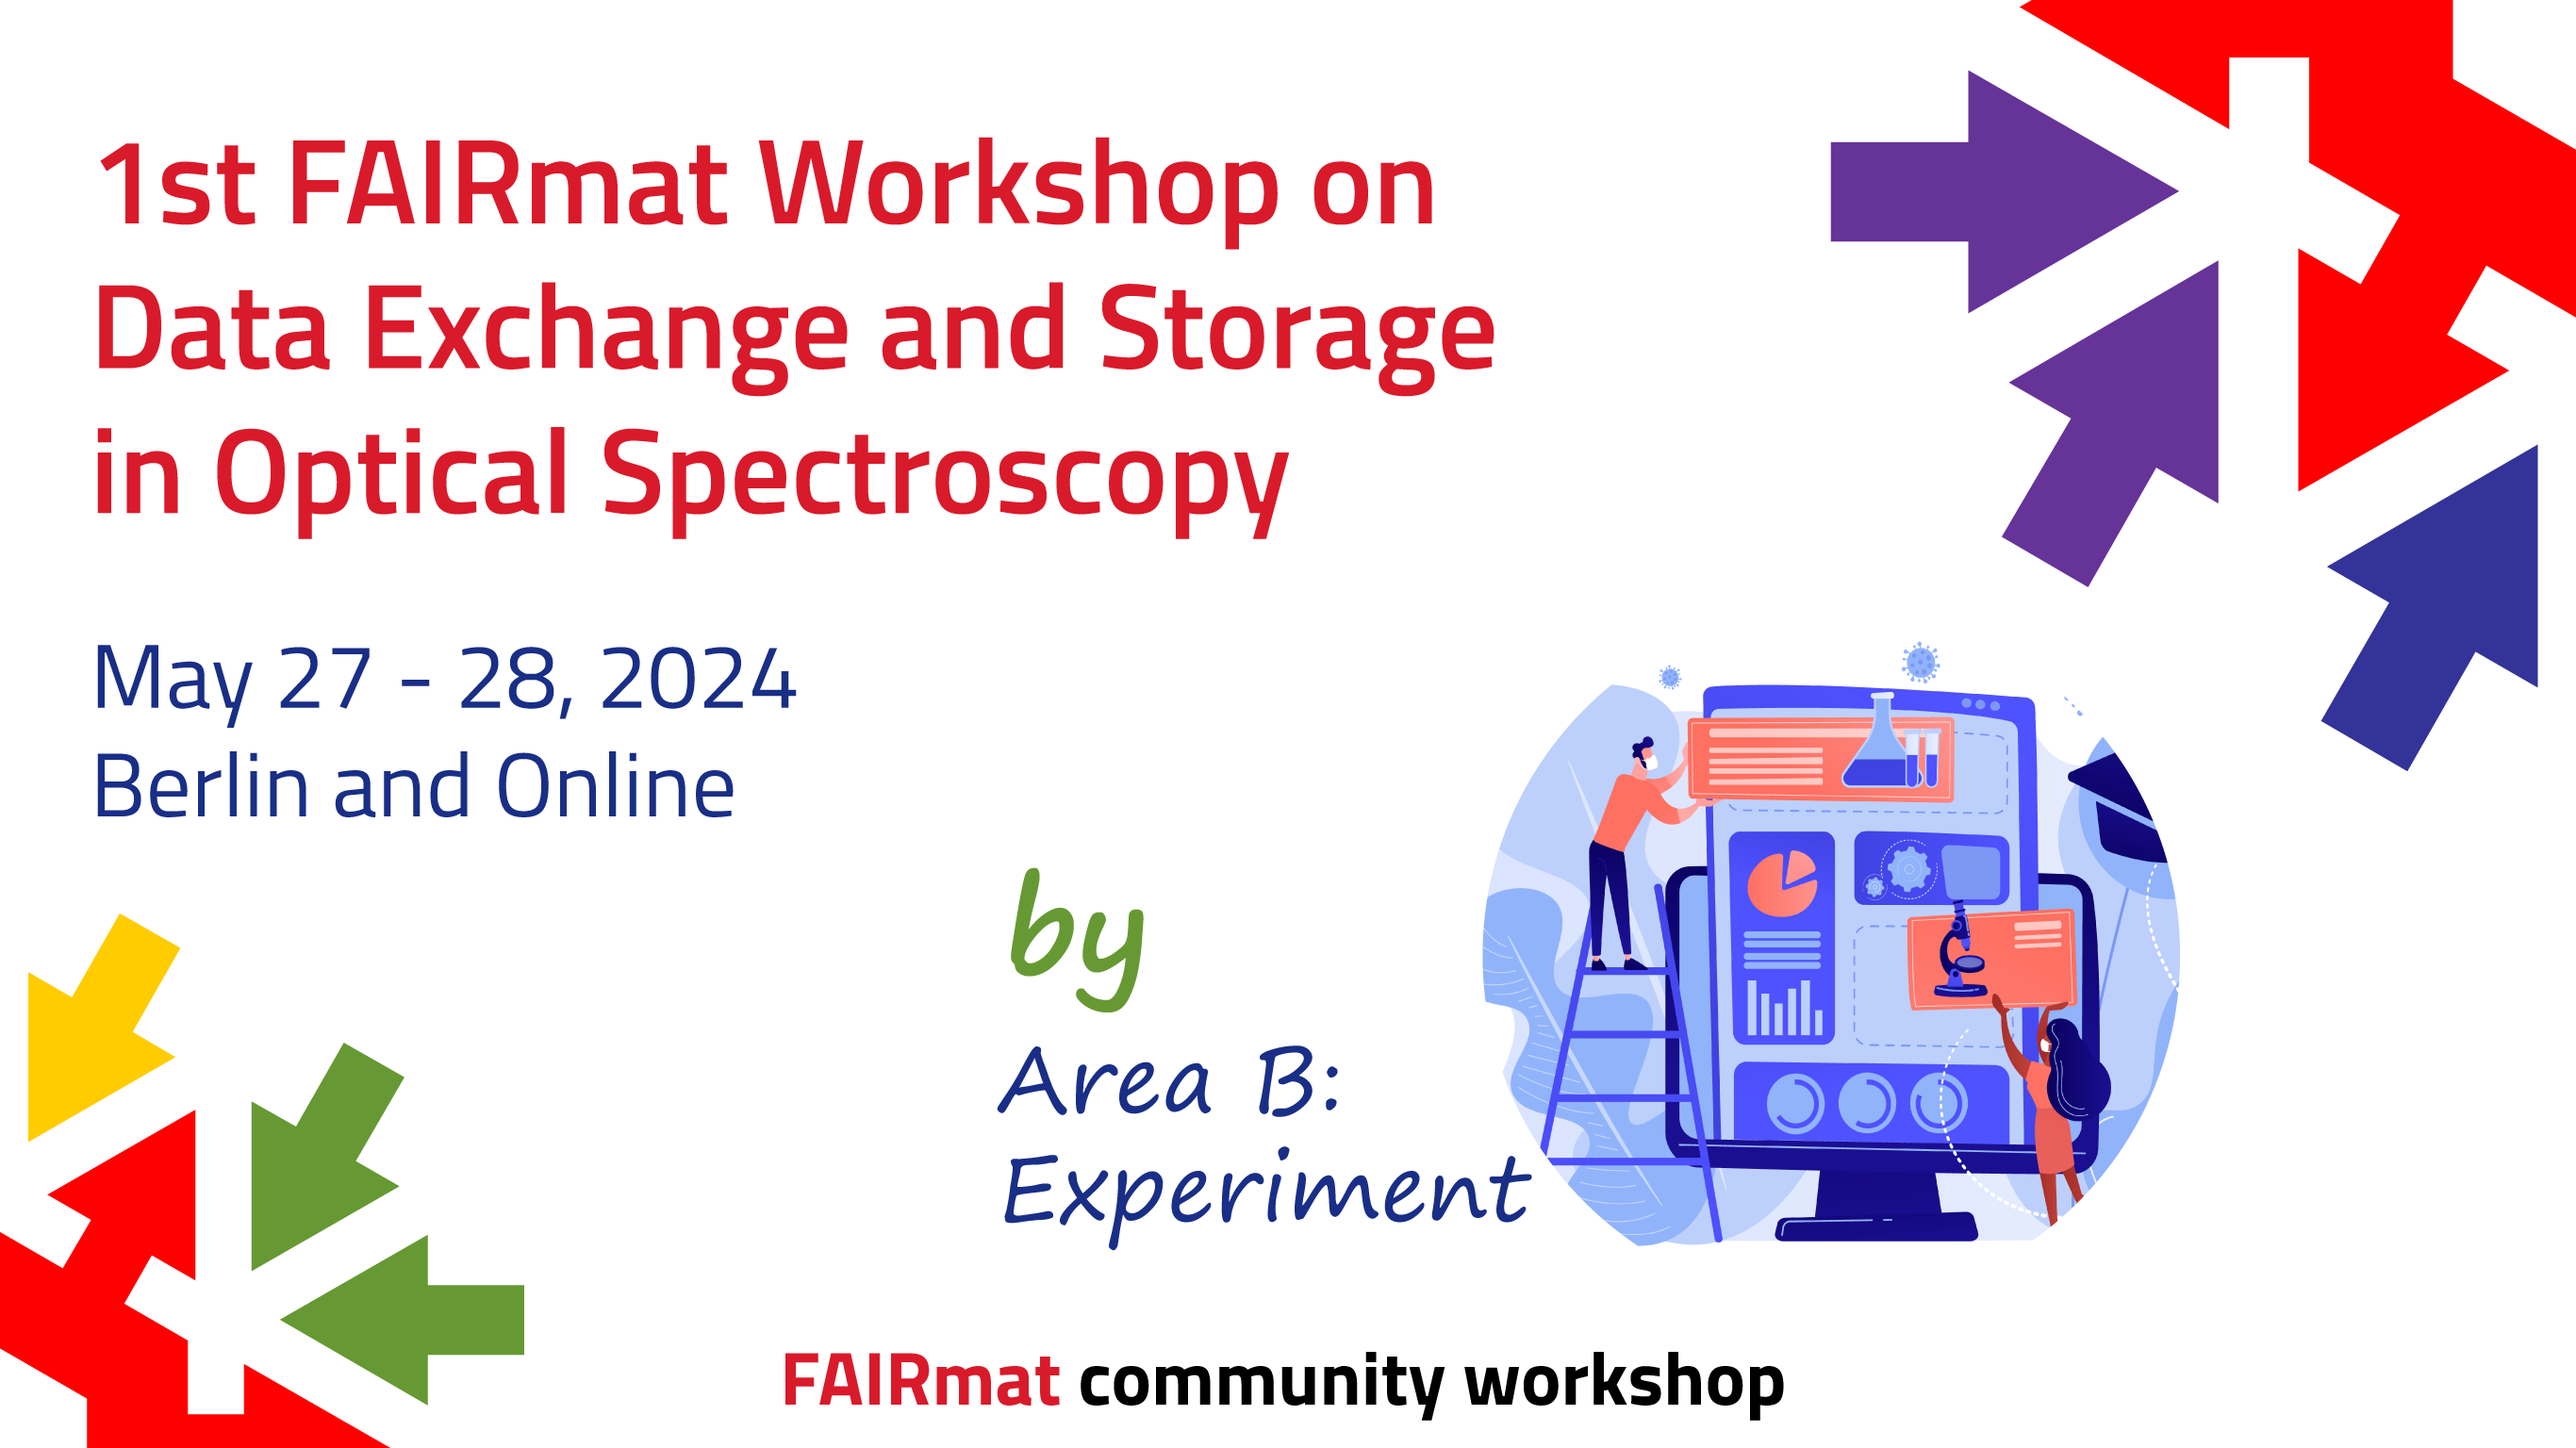 1st FAIRmat Workshop on Data Exchange and Storage in Optical Spectroscopy